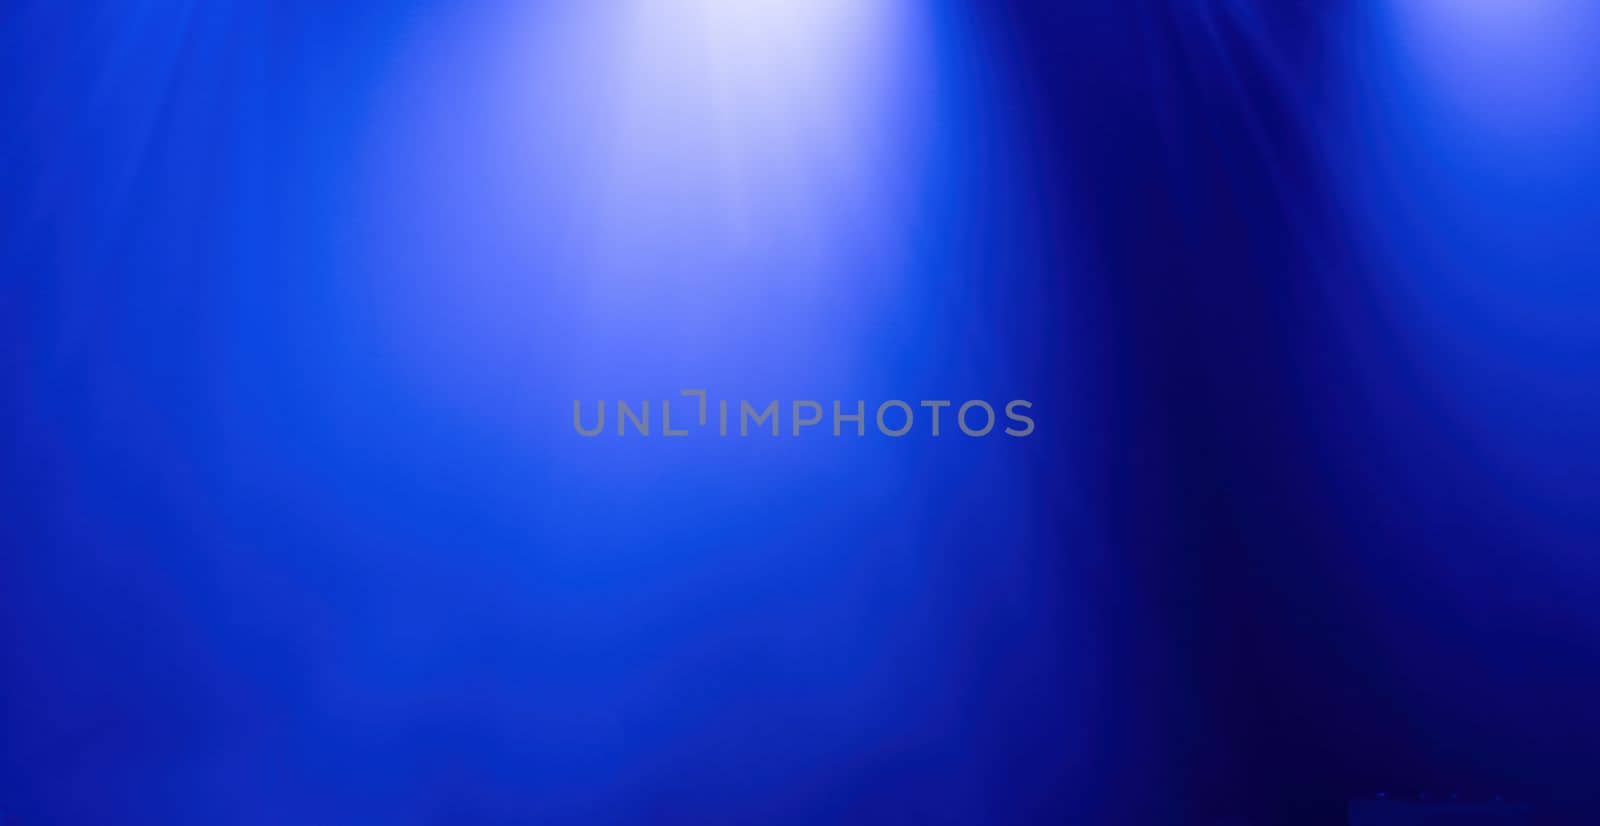 Background of blue light of stage from spotlights projectors, abstract background